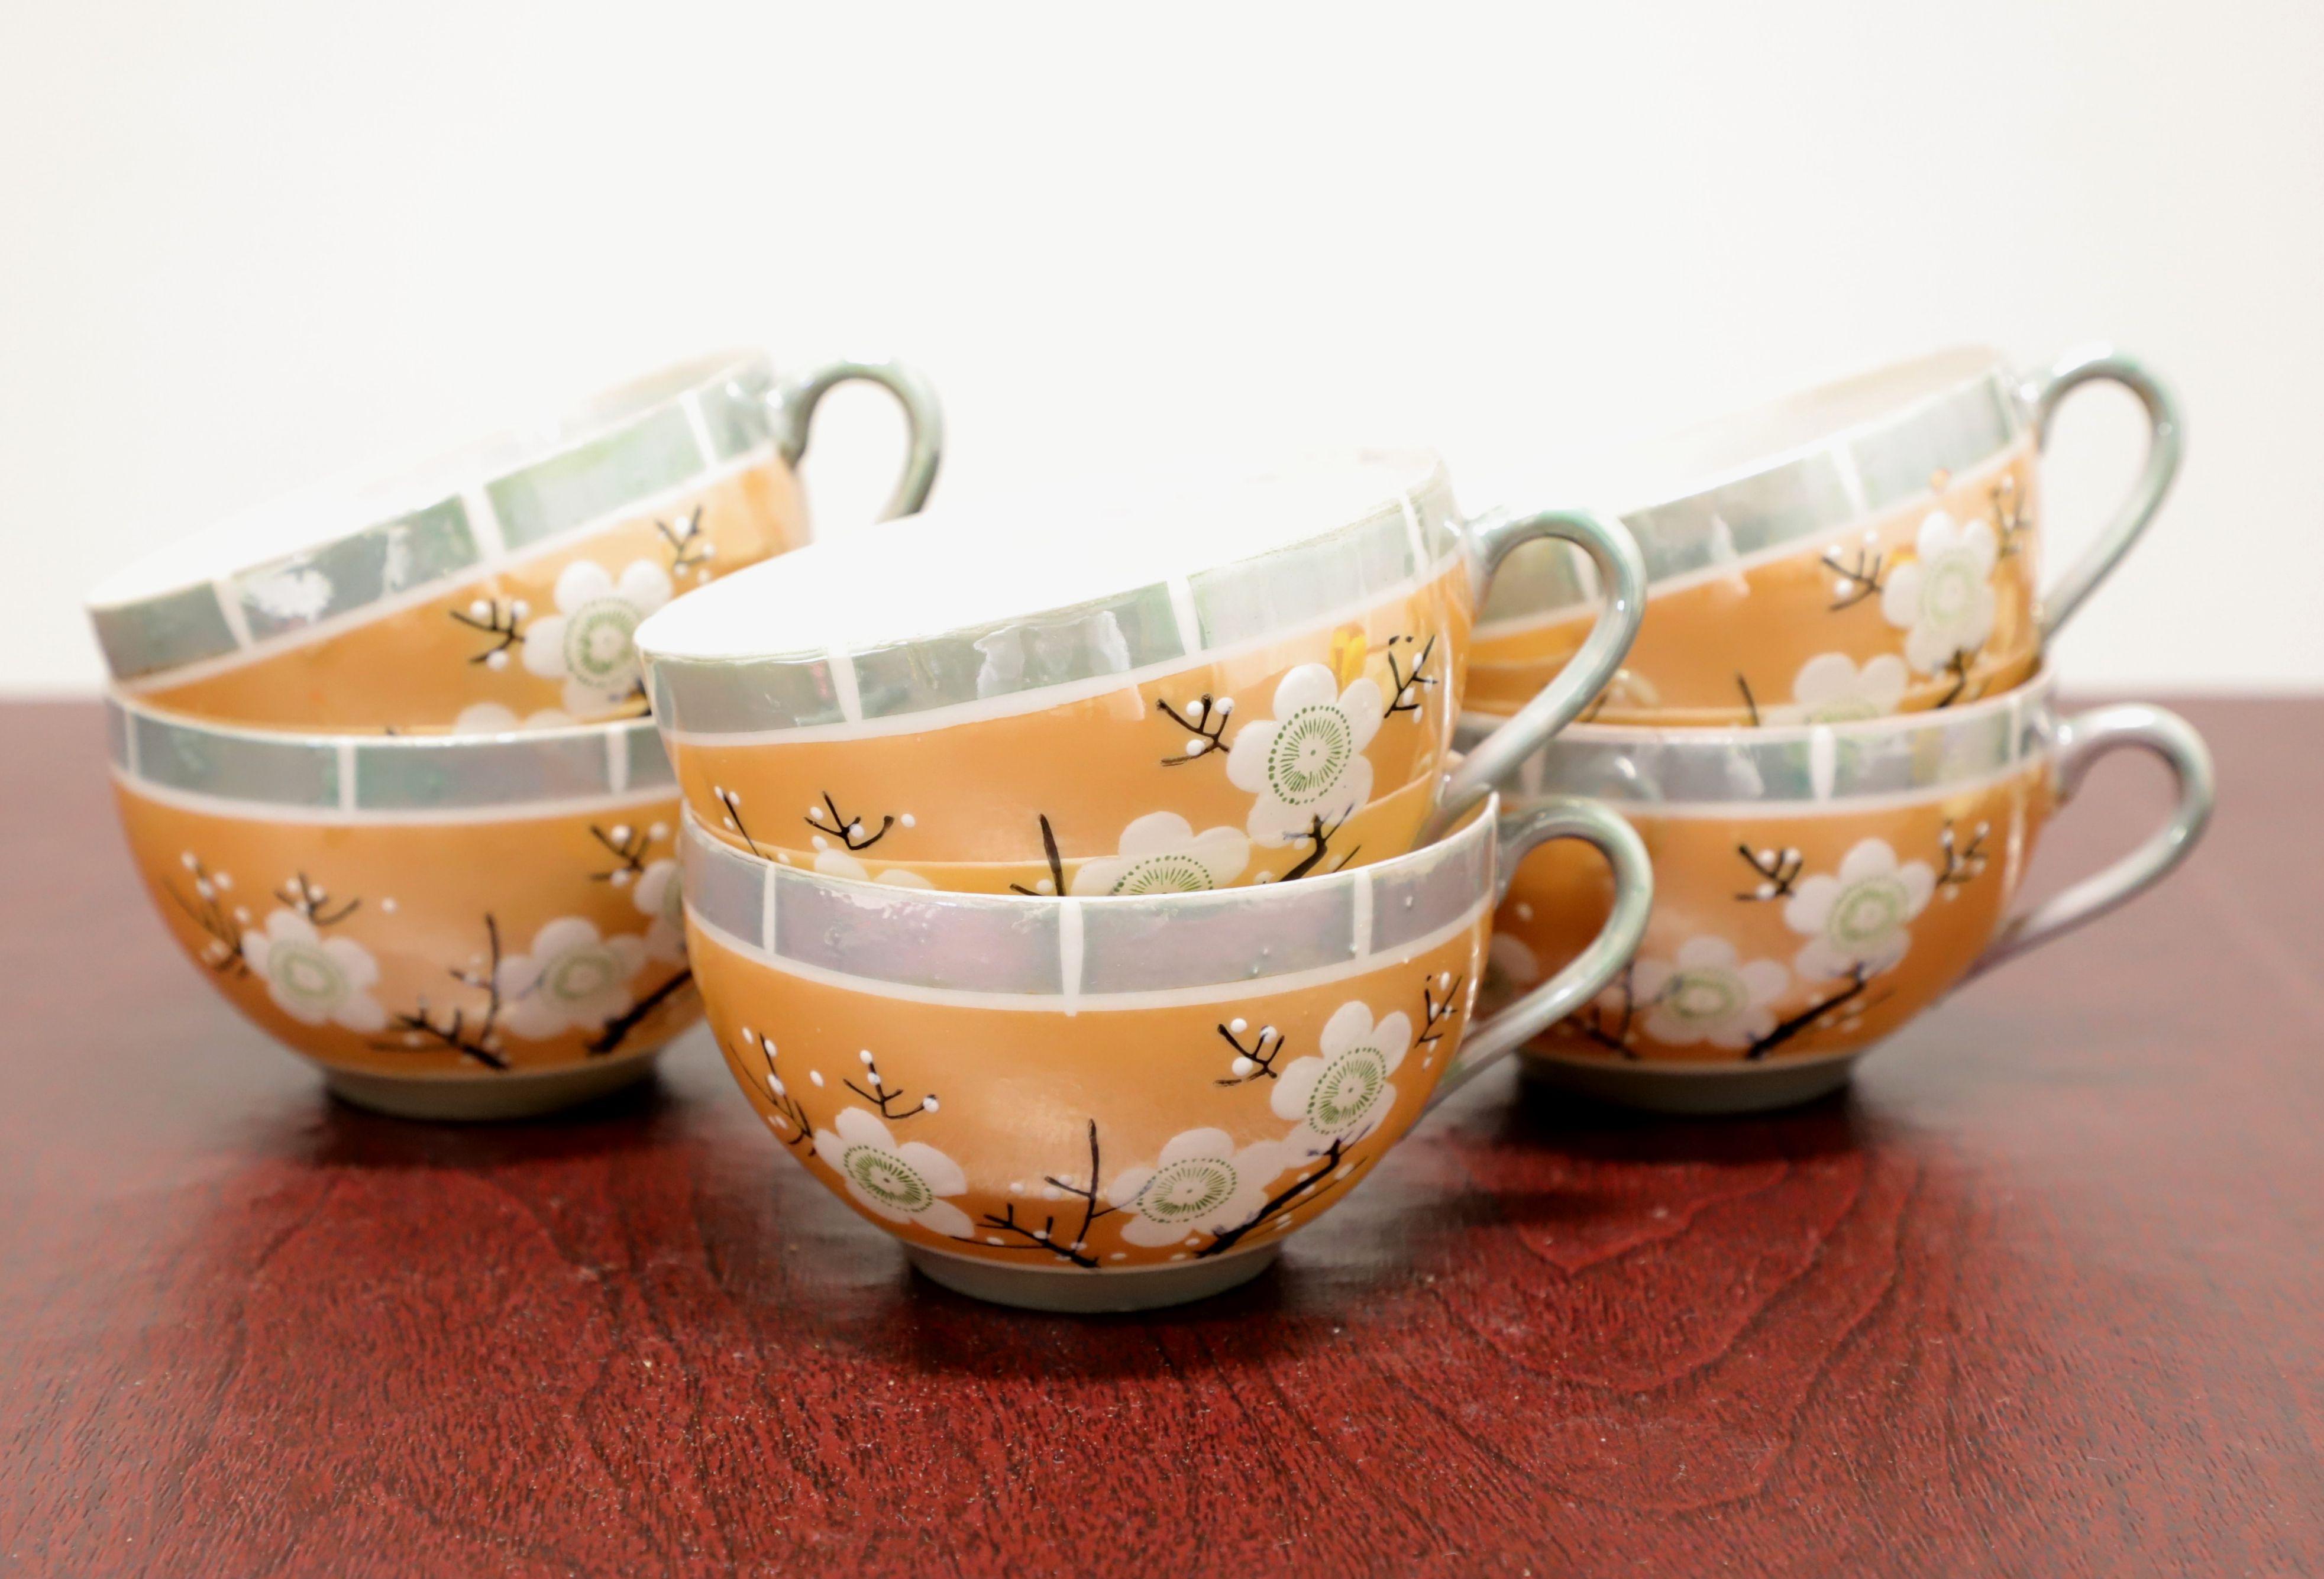 TAKITO Mid 20th Century Japanese Cherry Blossom Tea Service for Six - 21 Pieces For Sale 1